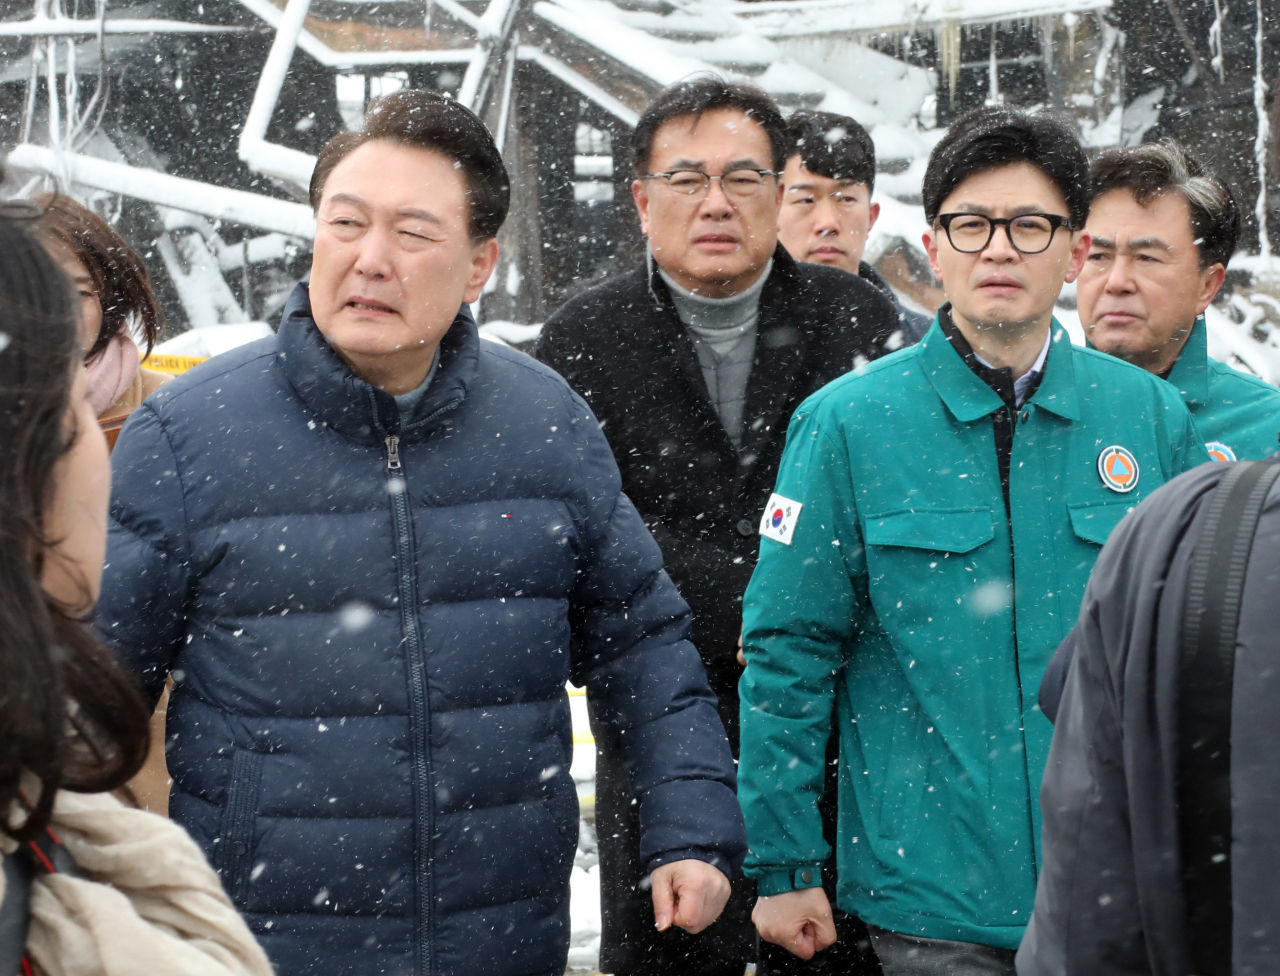 President Yoon Suk Yeol (left, front row) and People Power Party's interim leader Han Dong-hoon (right, front row) walk together on Tuesday afternoon at a traditional market in Seocheon, South Chungcheong Province, as they inspected the site of a fire that damaged over 200 stores Monday night. (Yonhap)